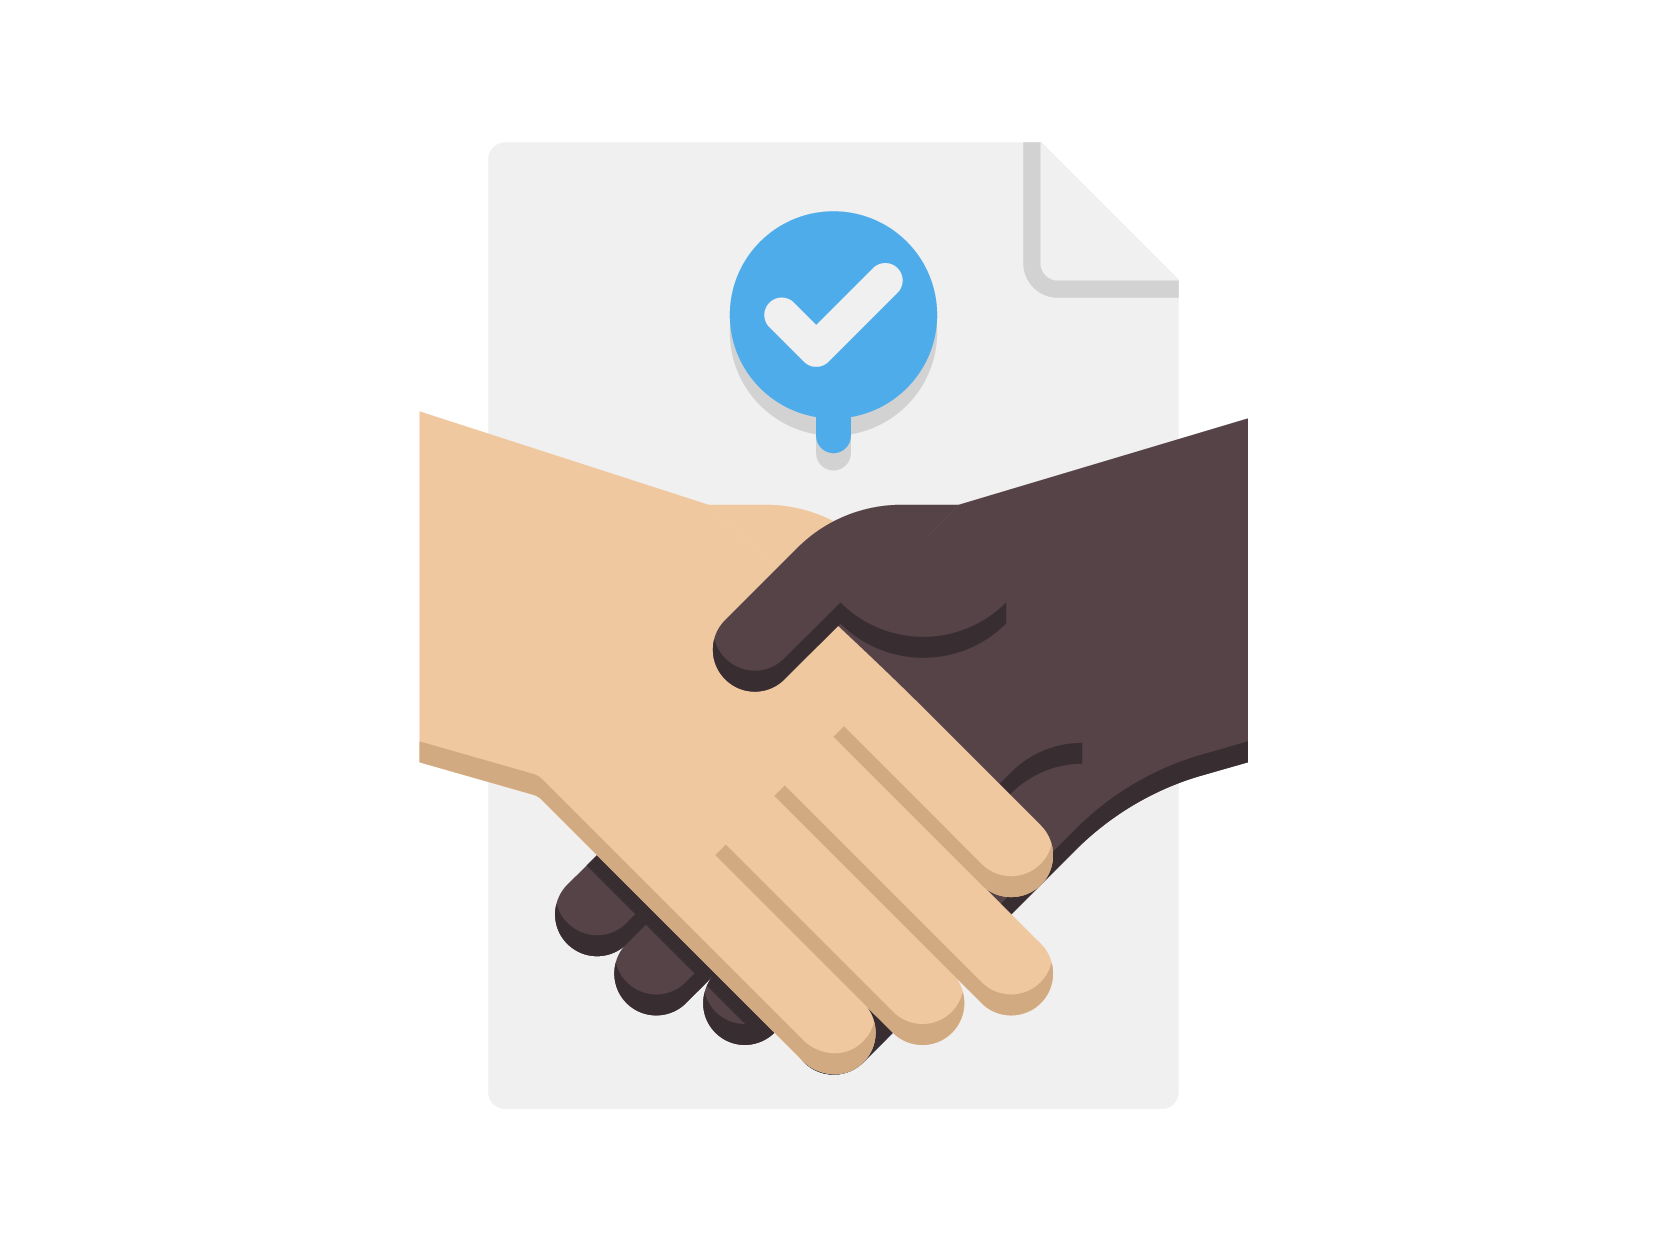 Two hands shaking over a document and a white and blue checkmark above it